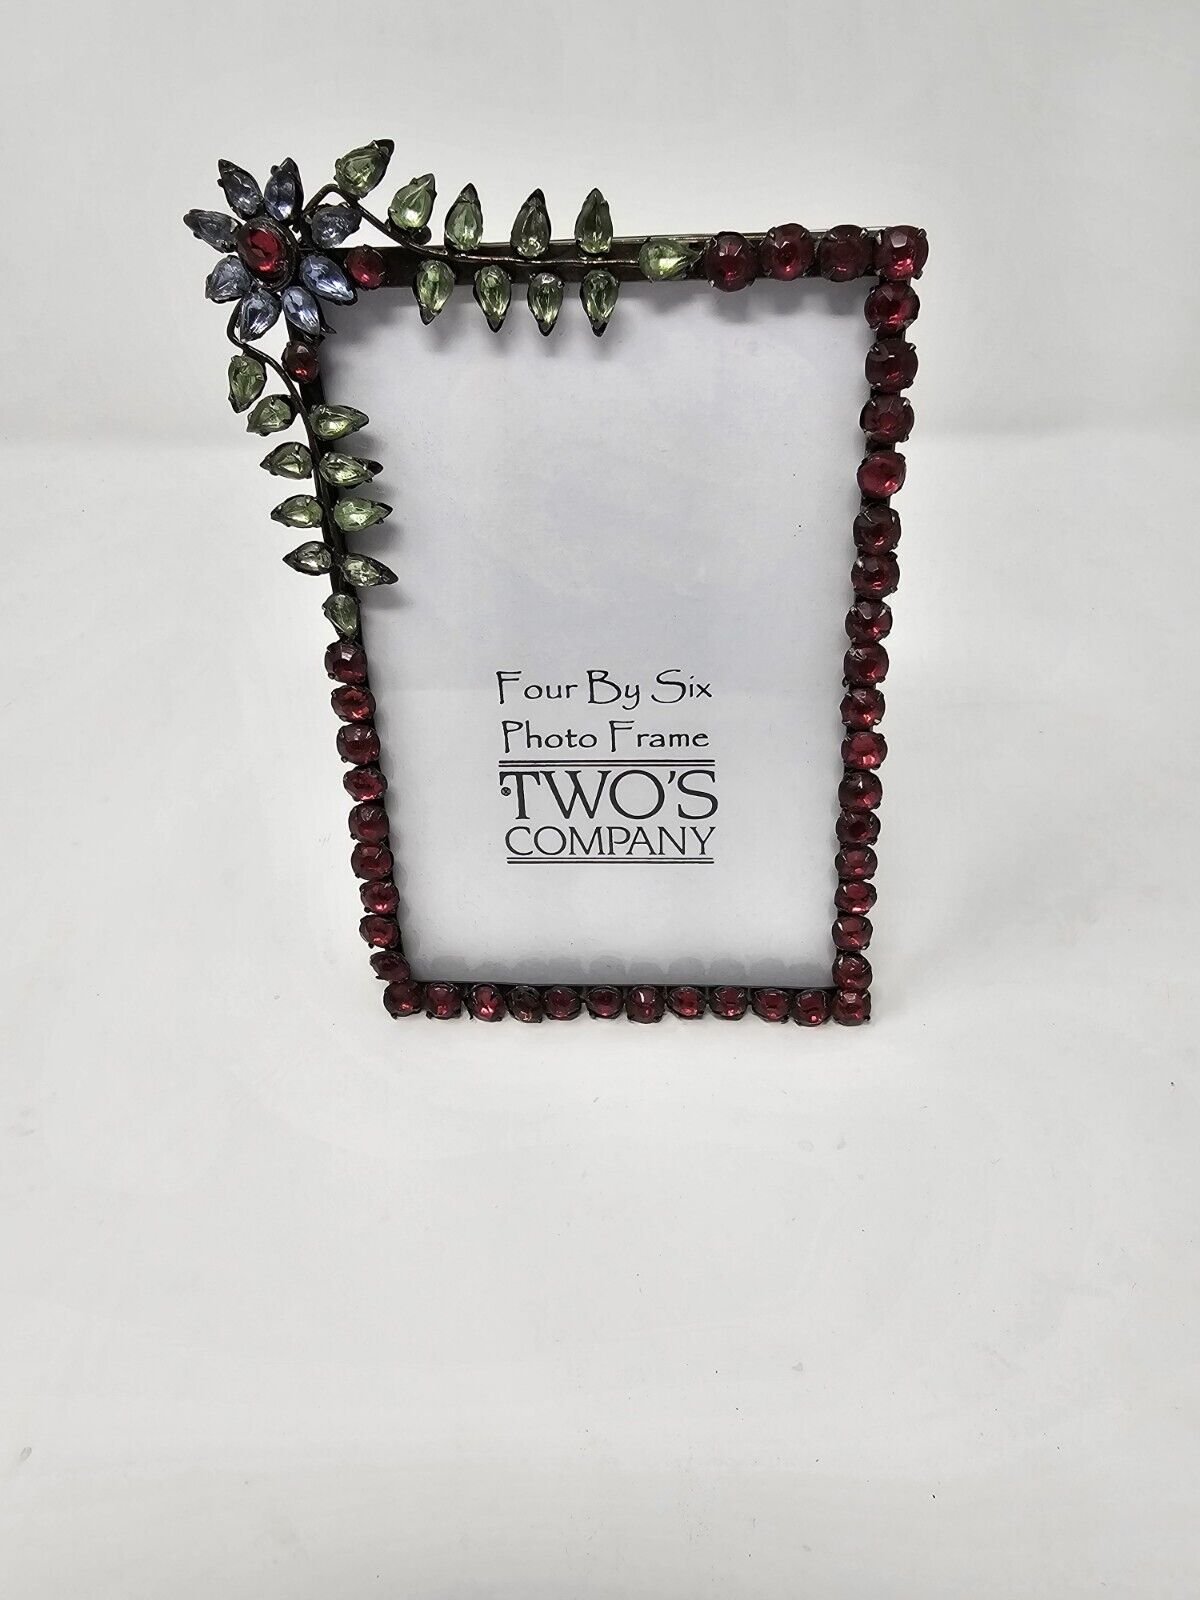 Stunning Two’s Company Crystal Multicolor Floral Picture Frame   4”x6” Photo